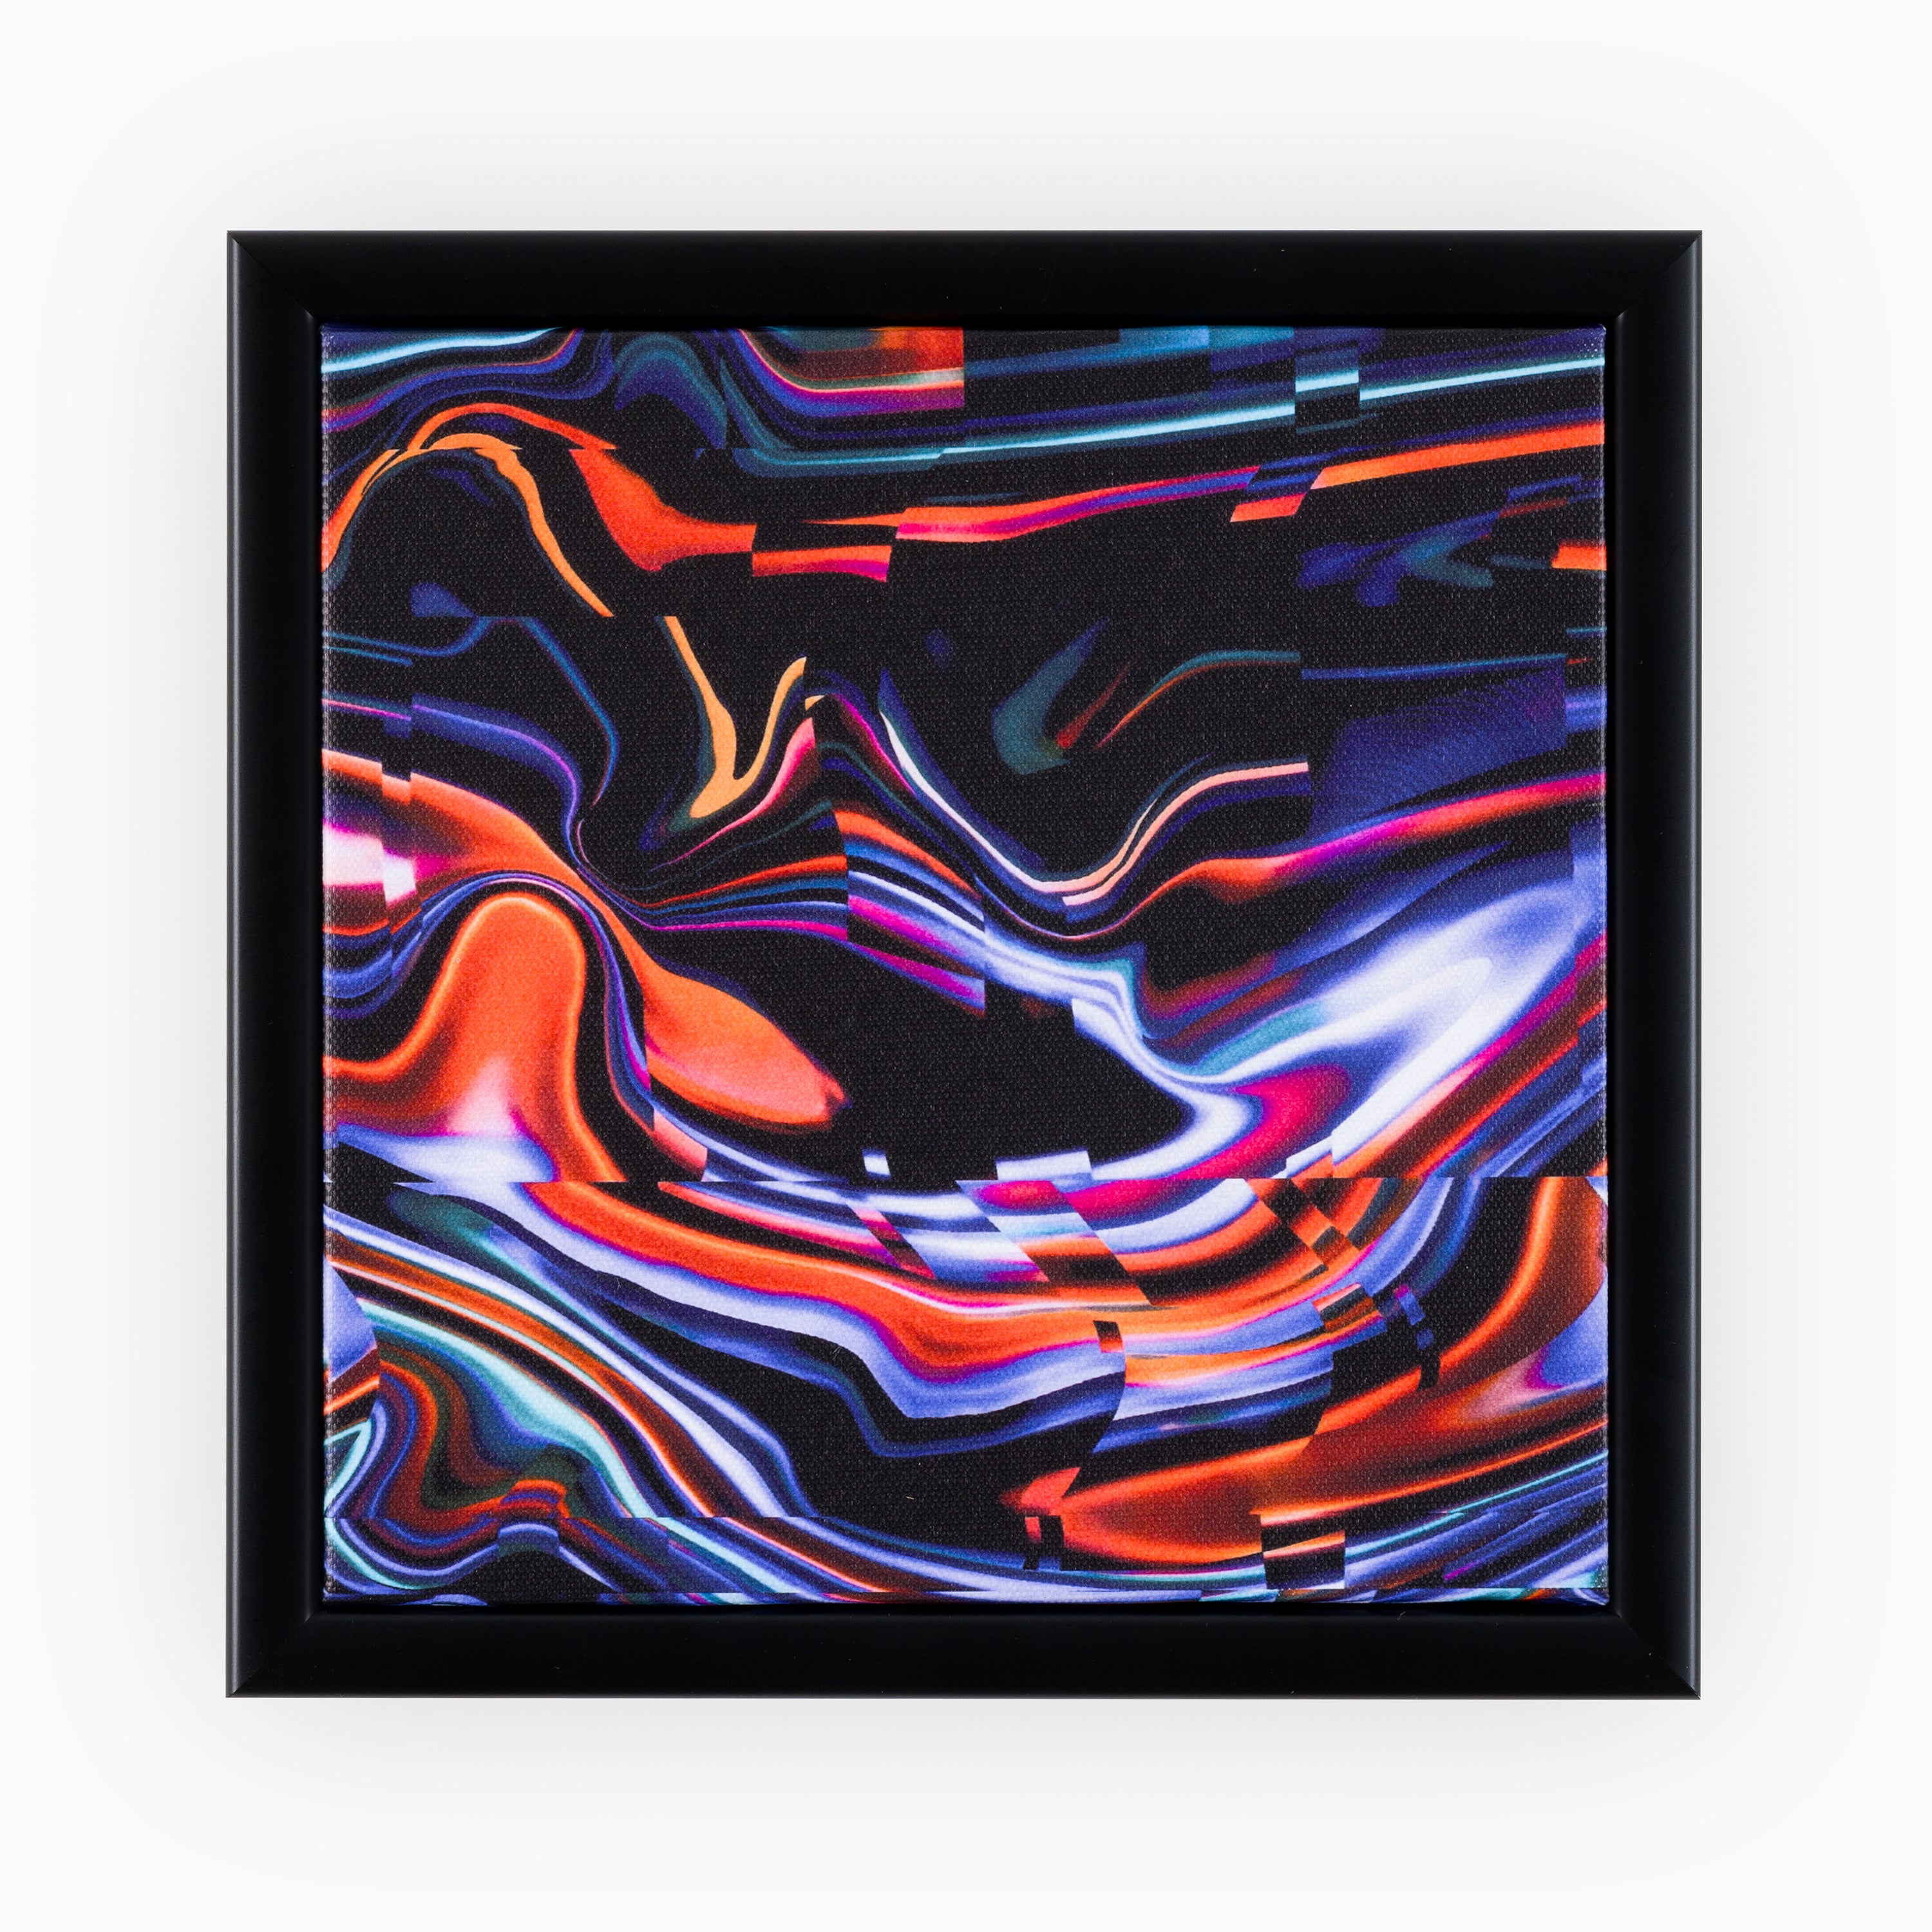 High-end abstract canvas art featuring an electric fusion of vivid colours against a dark background, creating a bold, flowing pattern, framed in a striking black border.